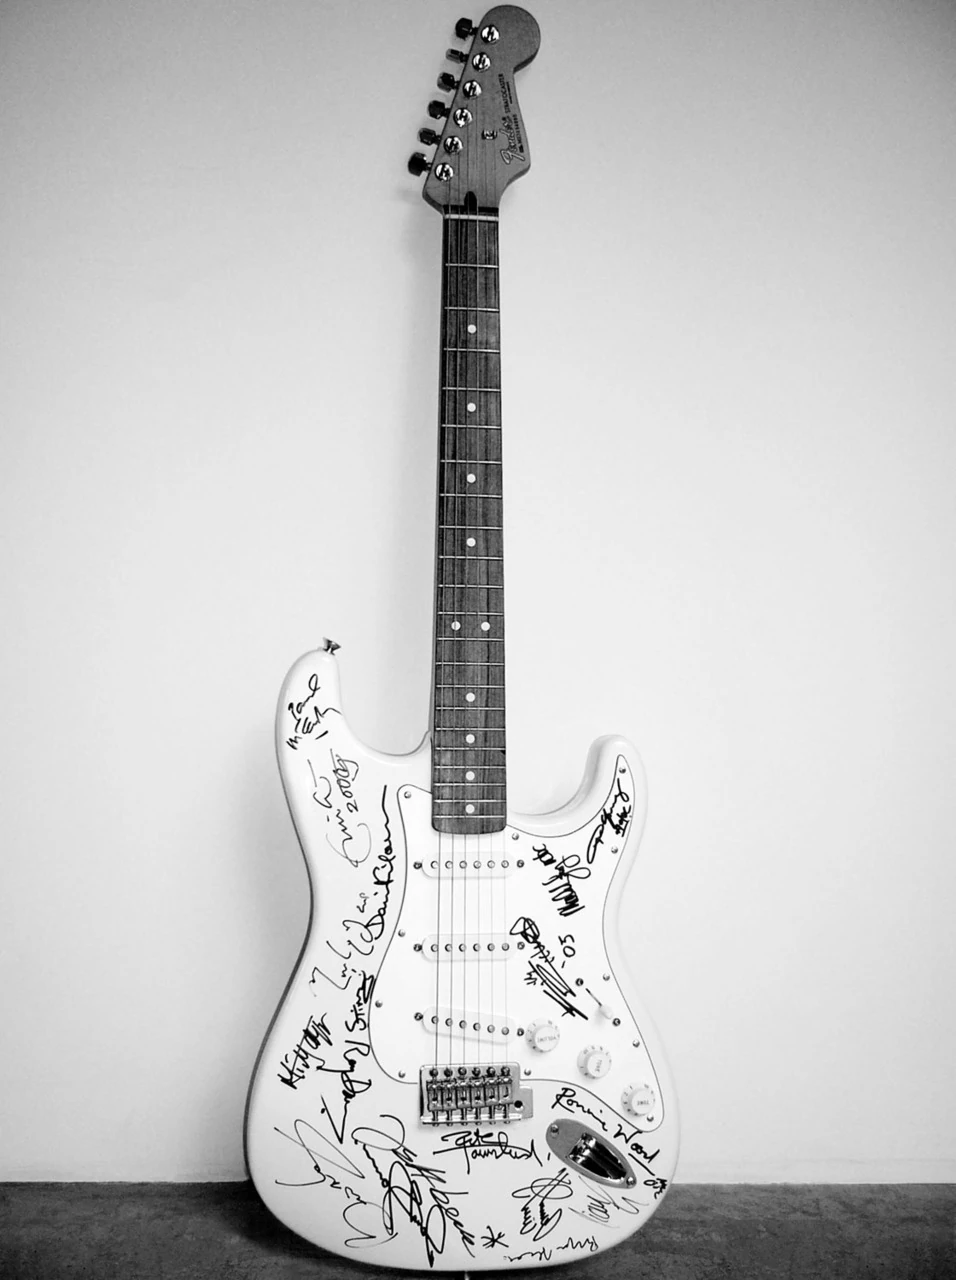 Most expensive Fender guitar ever: Reach Out to Asia